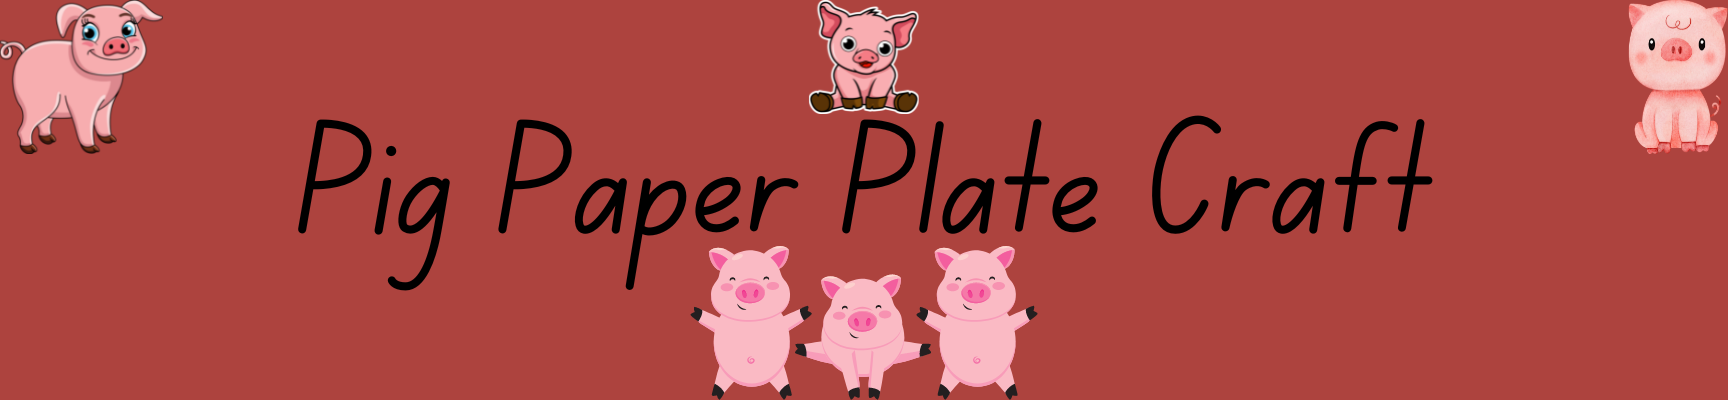 How to Create a Pig Paper Plate Craft